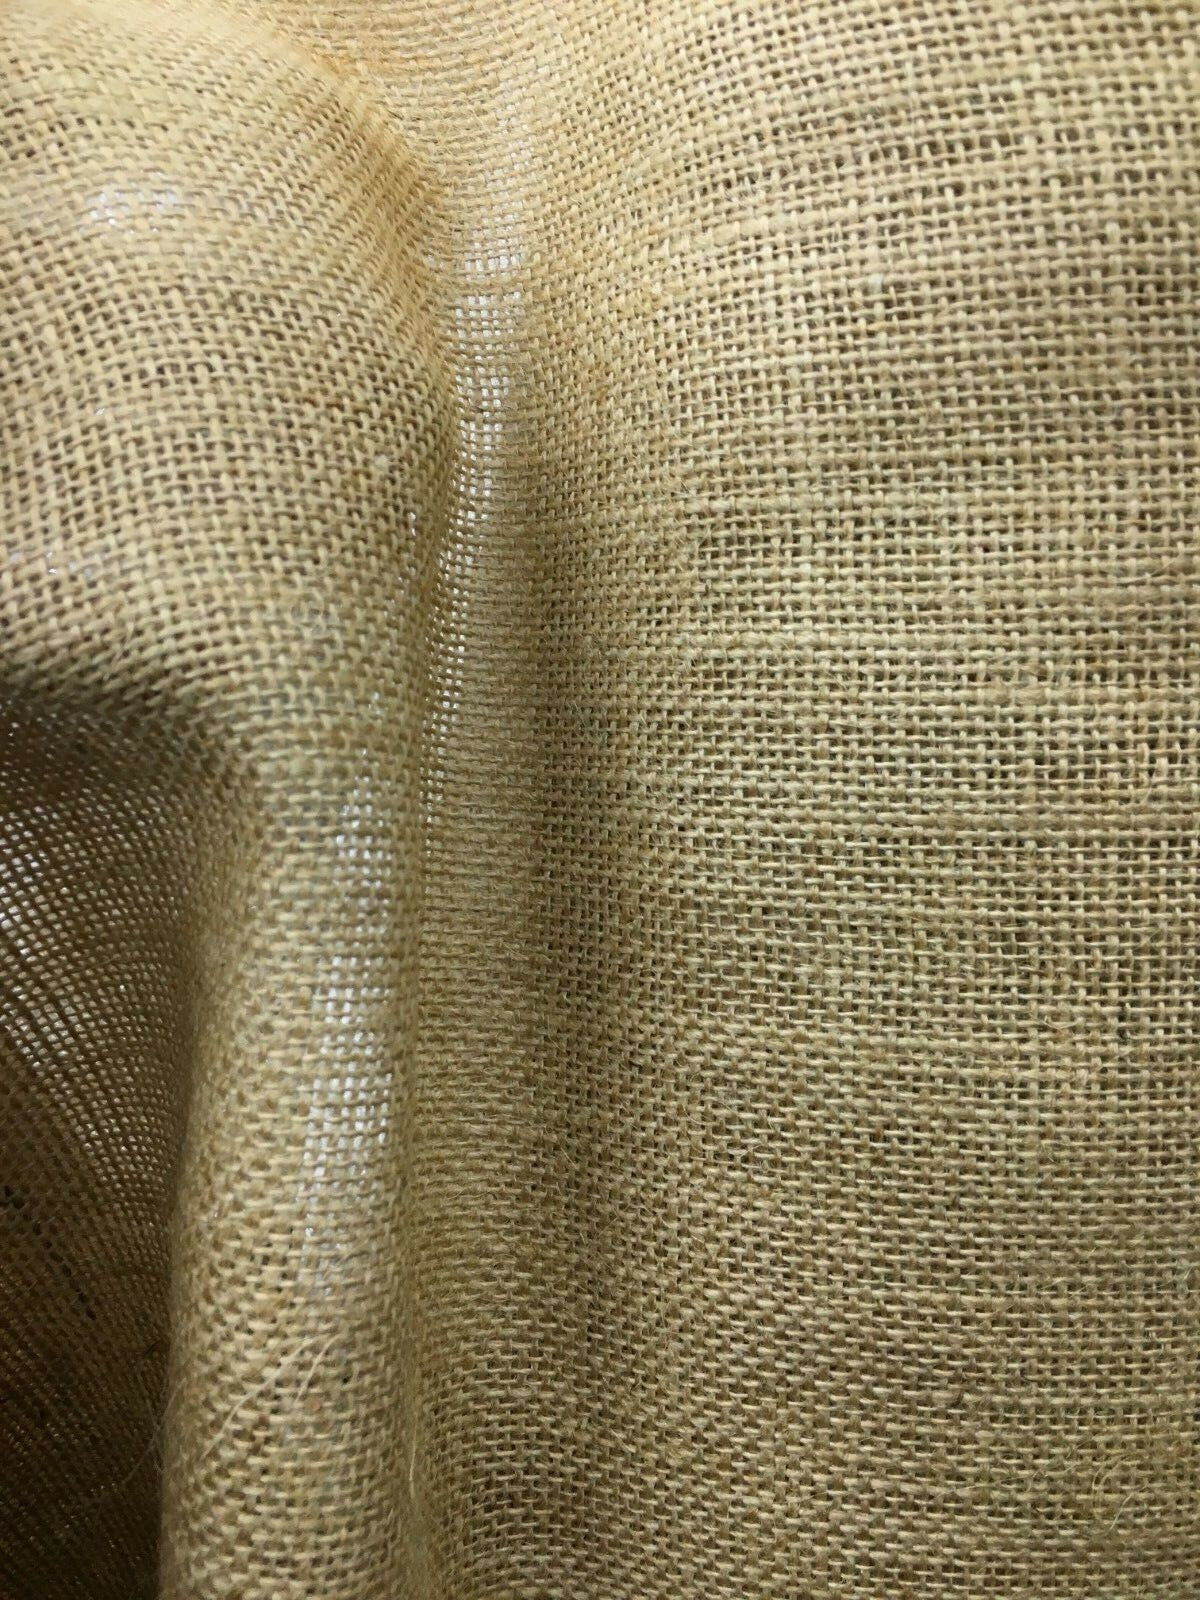 NATURAL JUTE Burlap Fabric (60 in.) Sold By The Yard